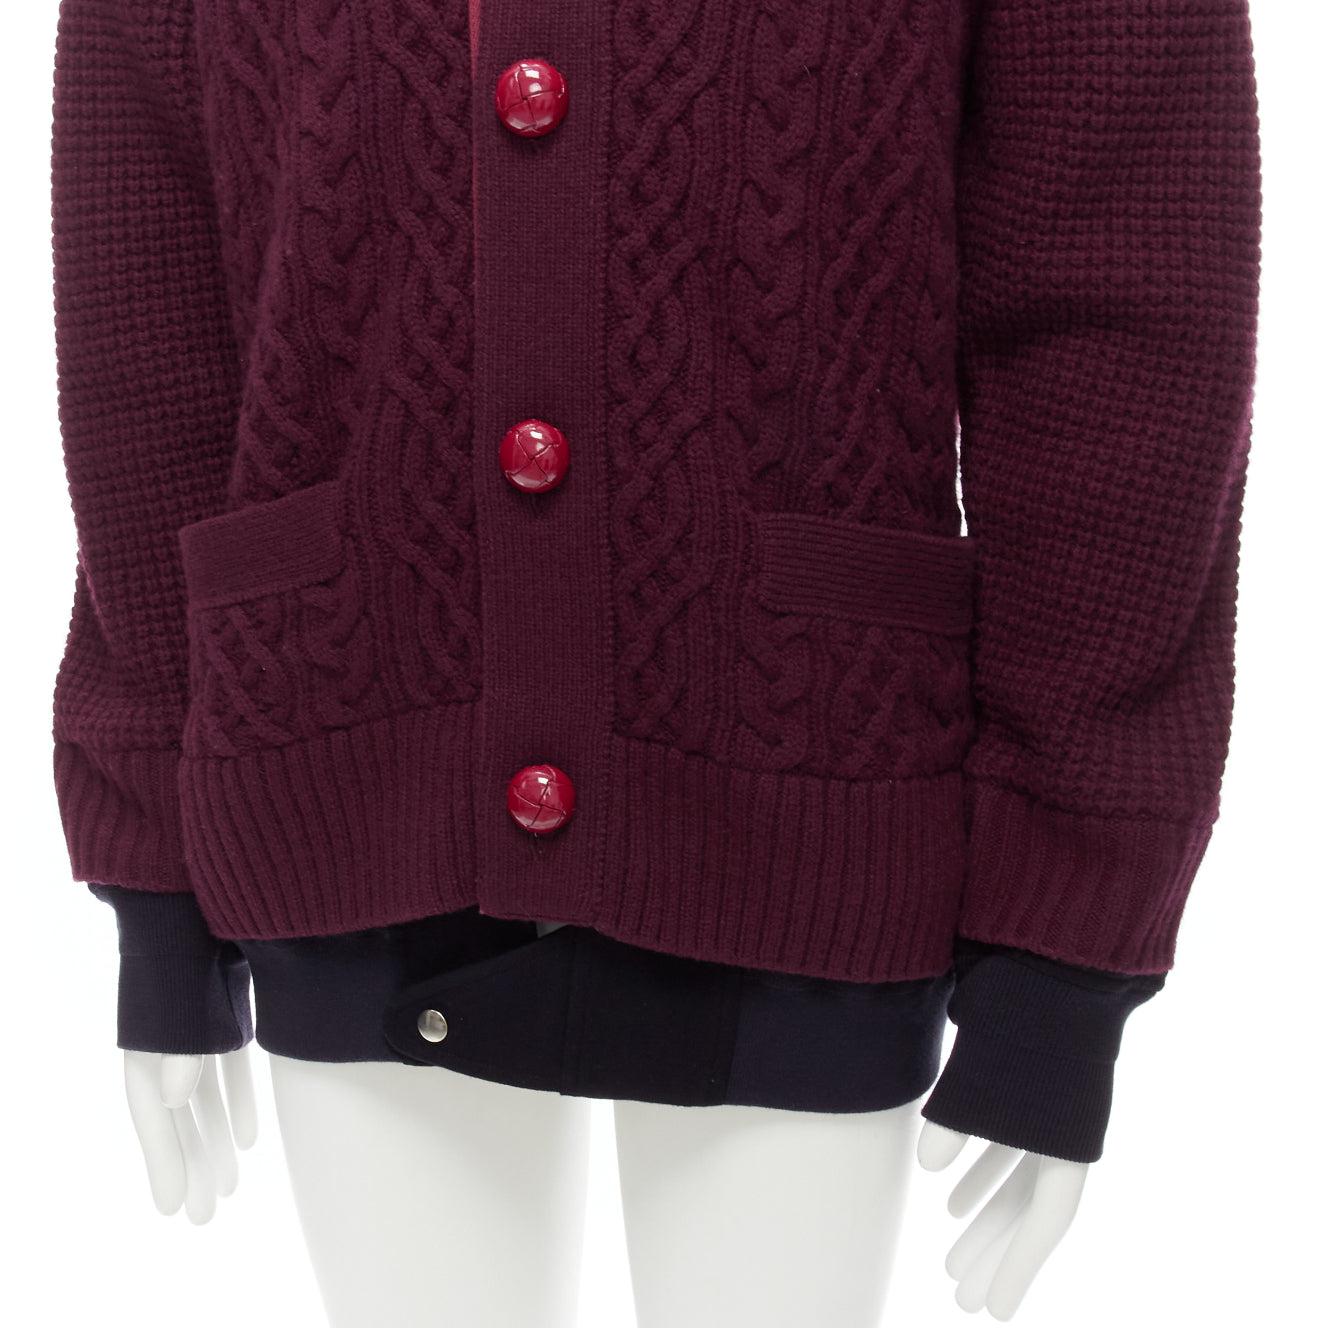 SACAI 2016 burgundy 100% wool cable knit layered hem cardigan JP3 L
Reference: CAWG/A00299
Brand: Sacai
Designer: Chitose Abe
Collection: 2016
Material: Wool
Color: Burgundy, Navy
Pattern: Solid
Closure: Button
Lining: Blue Fabric
Extra Details: